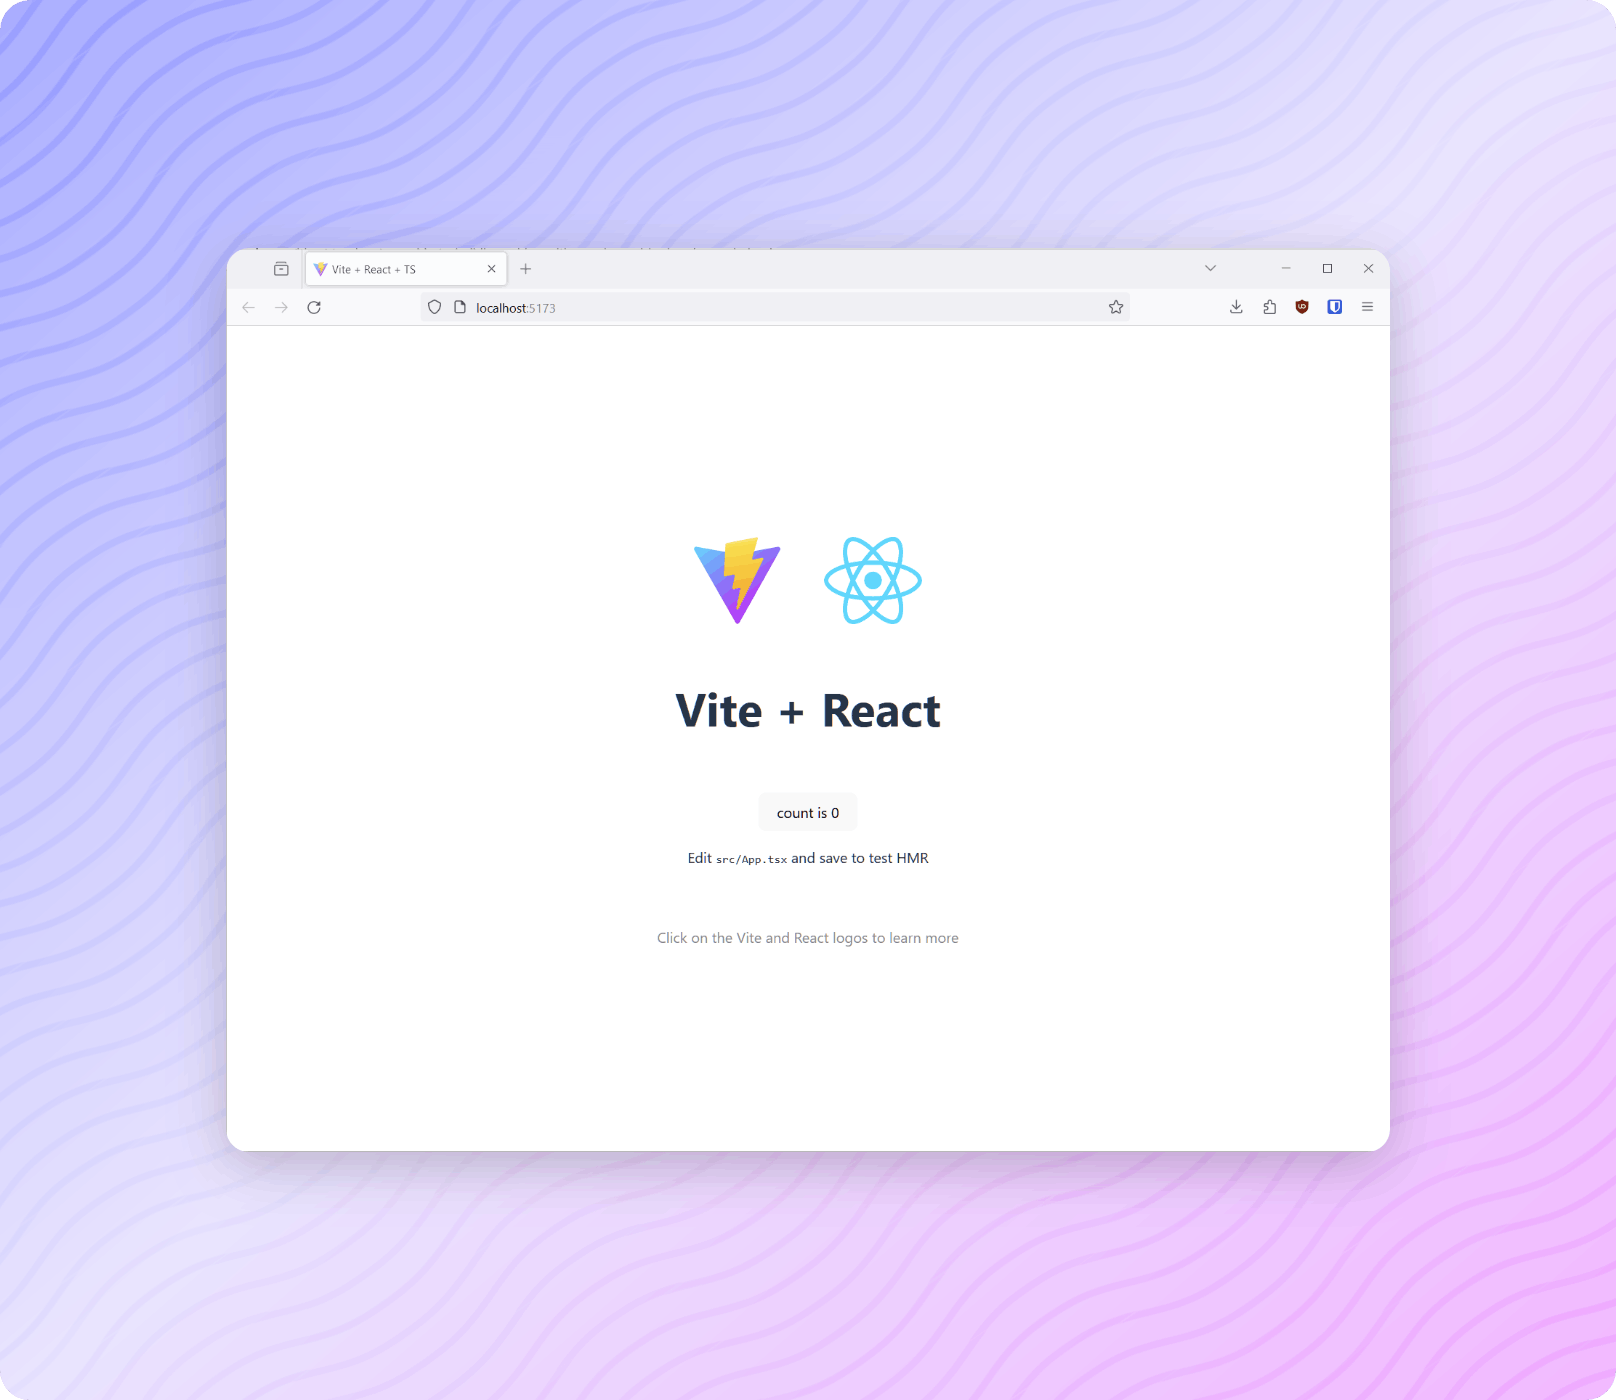 A screenshot of a computer browser displaying a simple web application interface with the title "Vite + React" and logos of Vite and React, showing a counter set to zero.